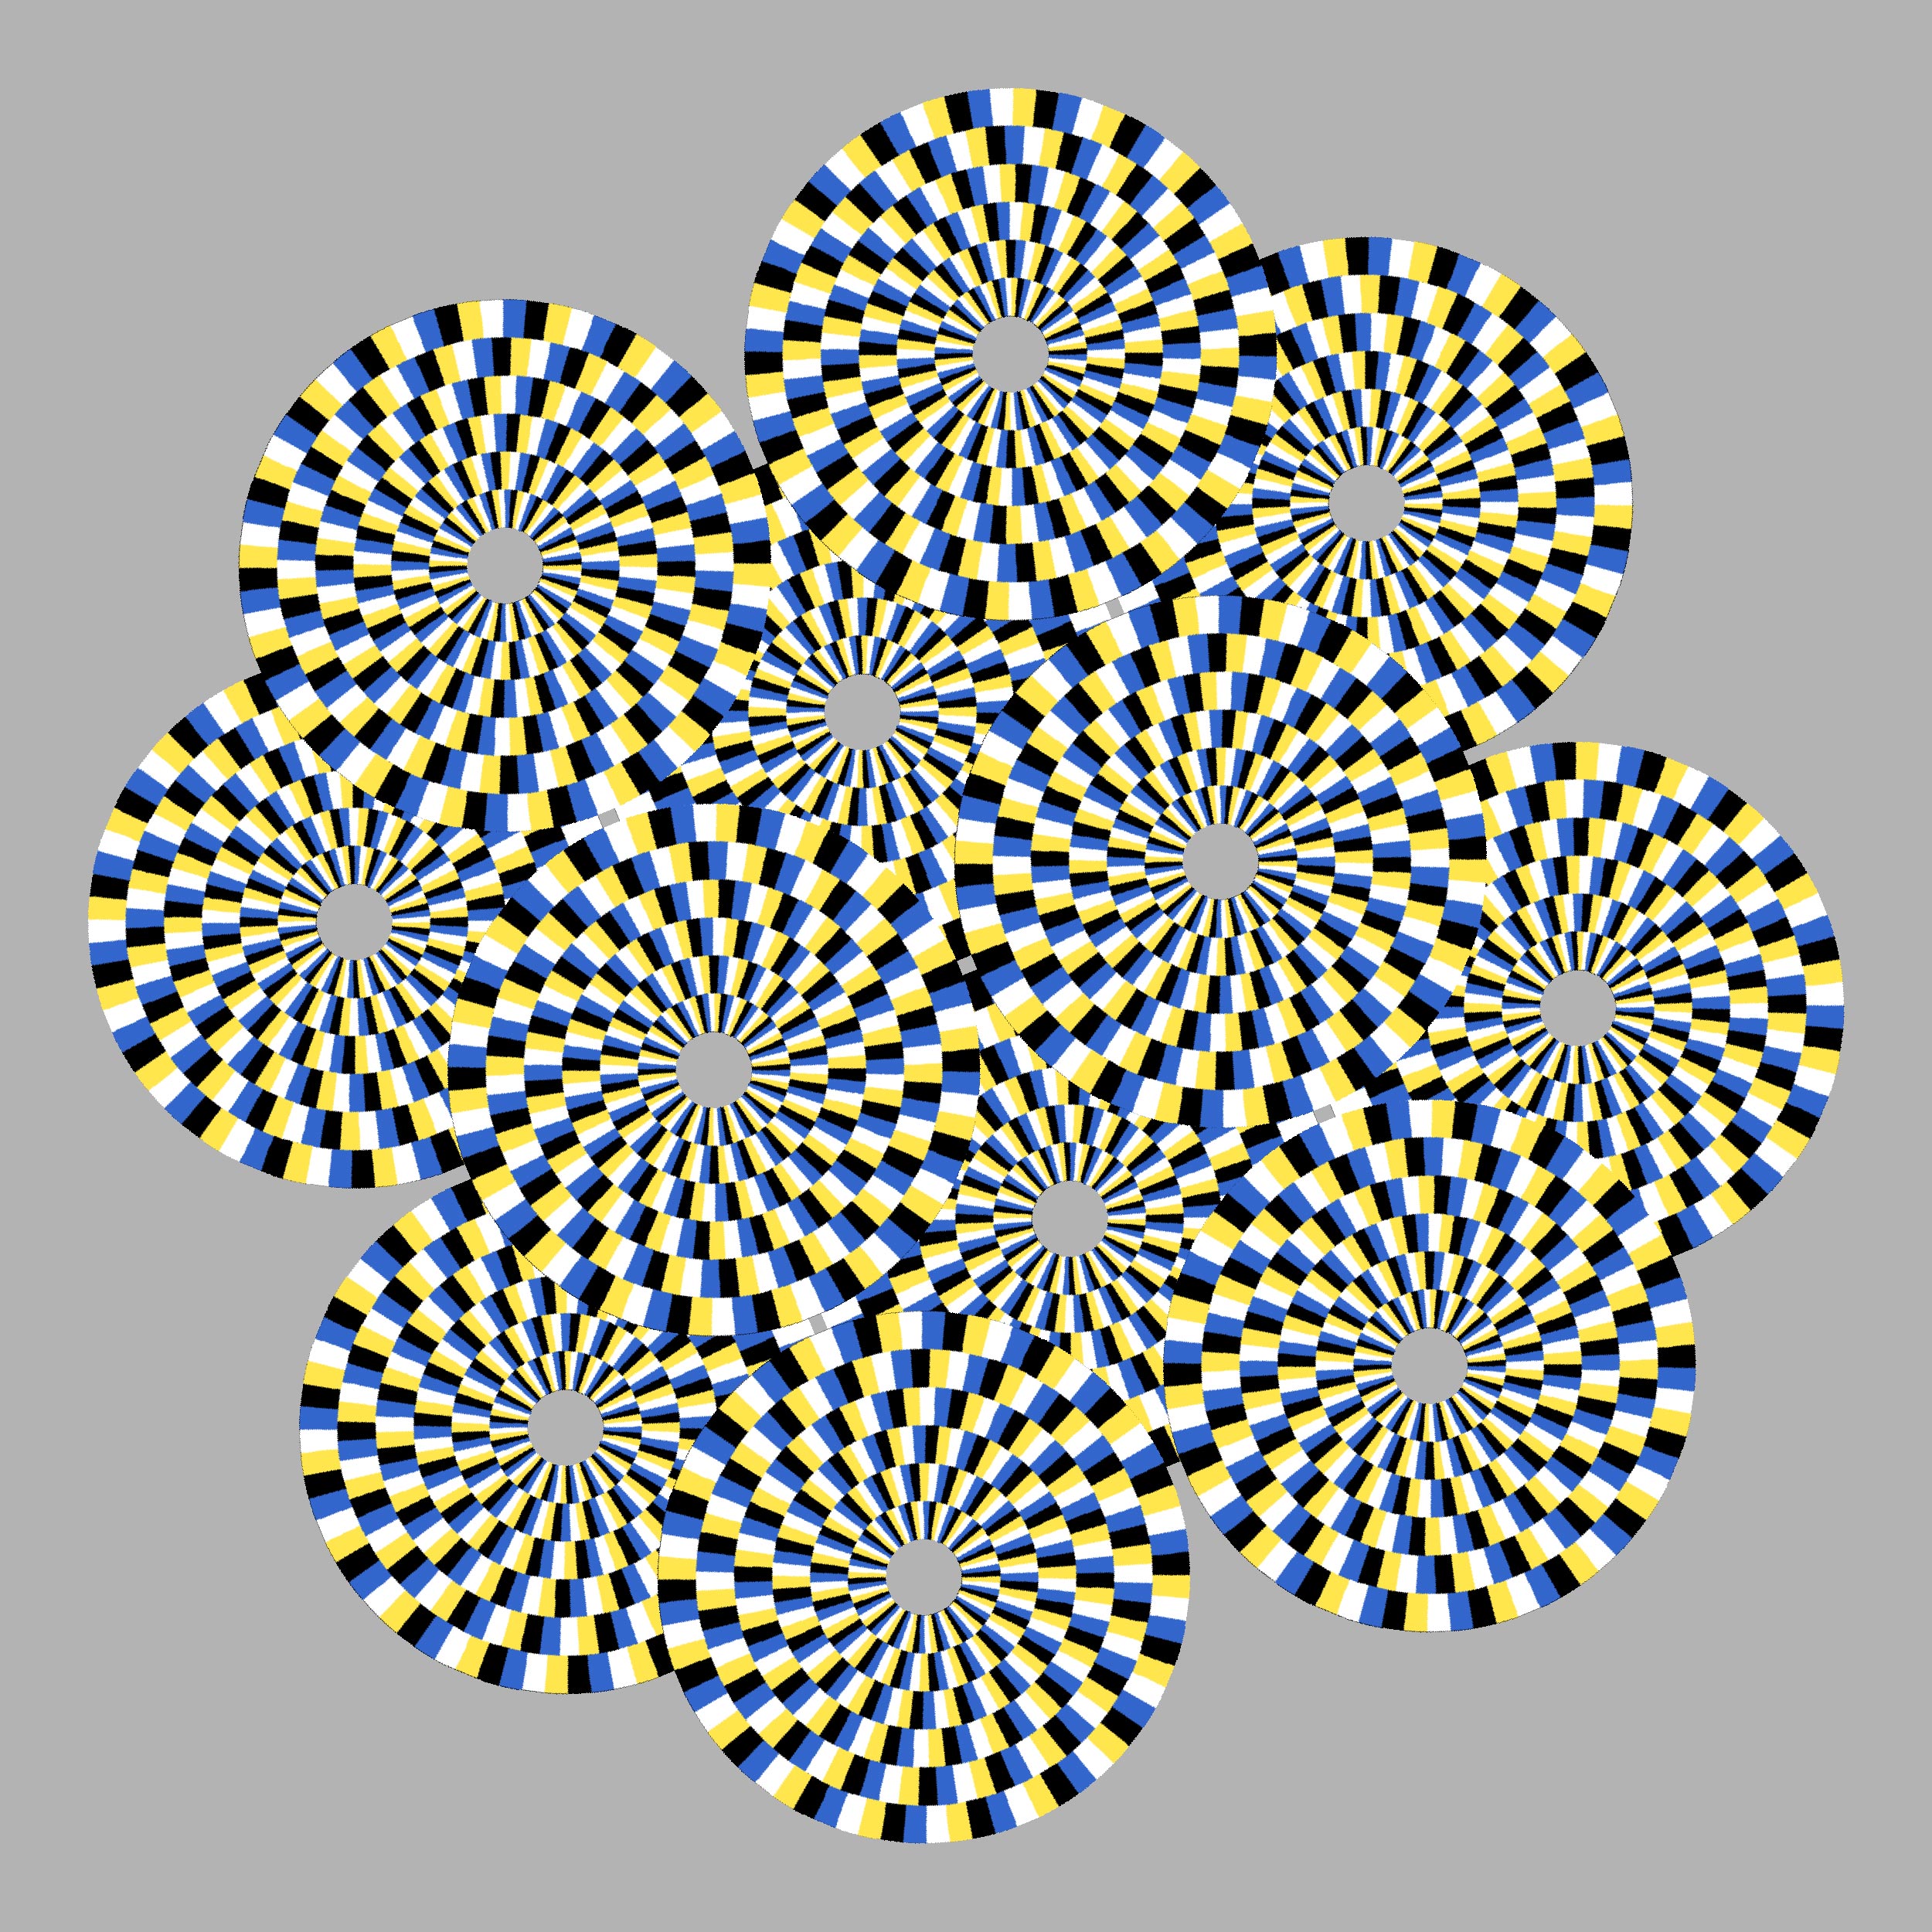 Optical Illusions Have Long Mystified Neuroscientists – Now